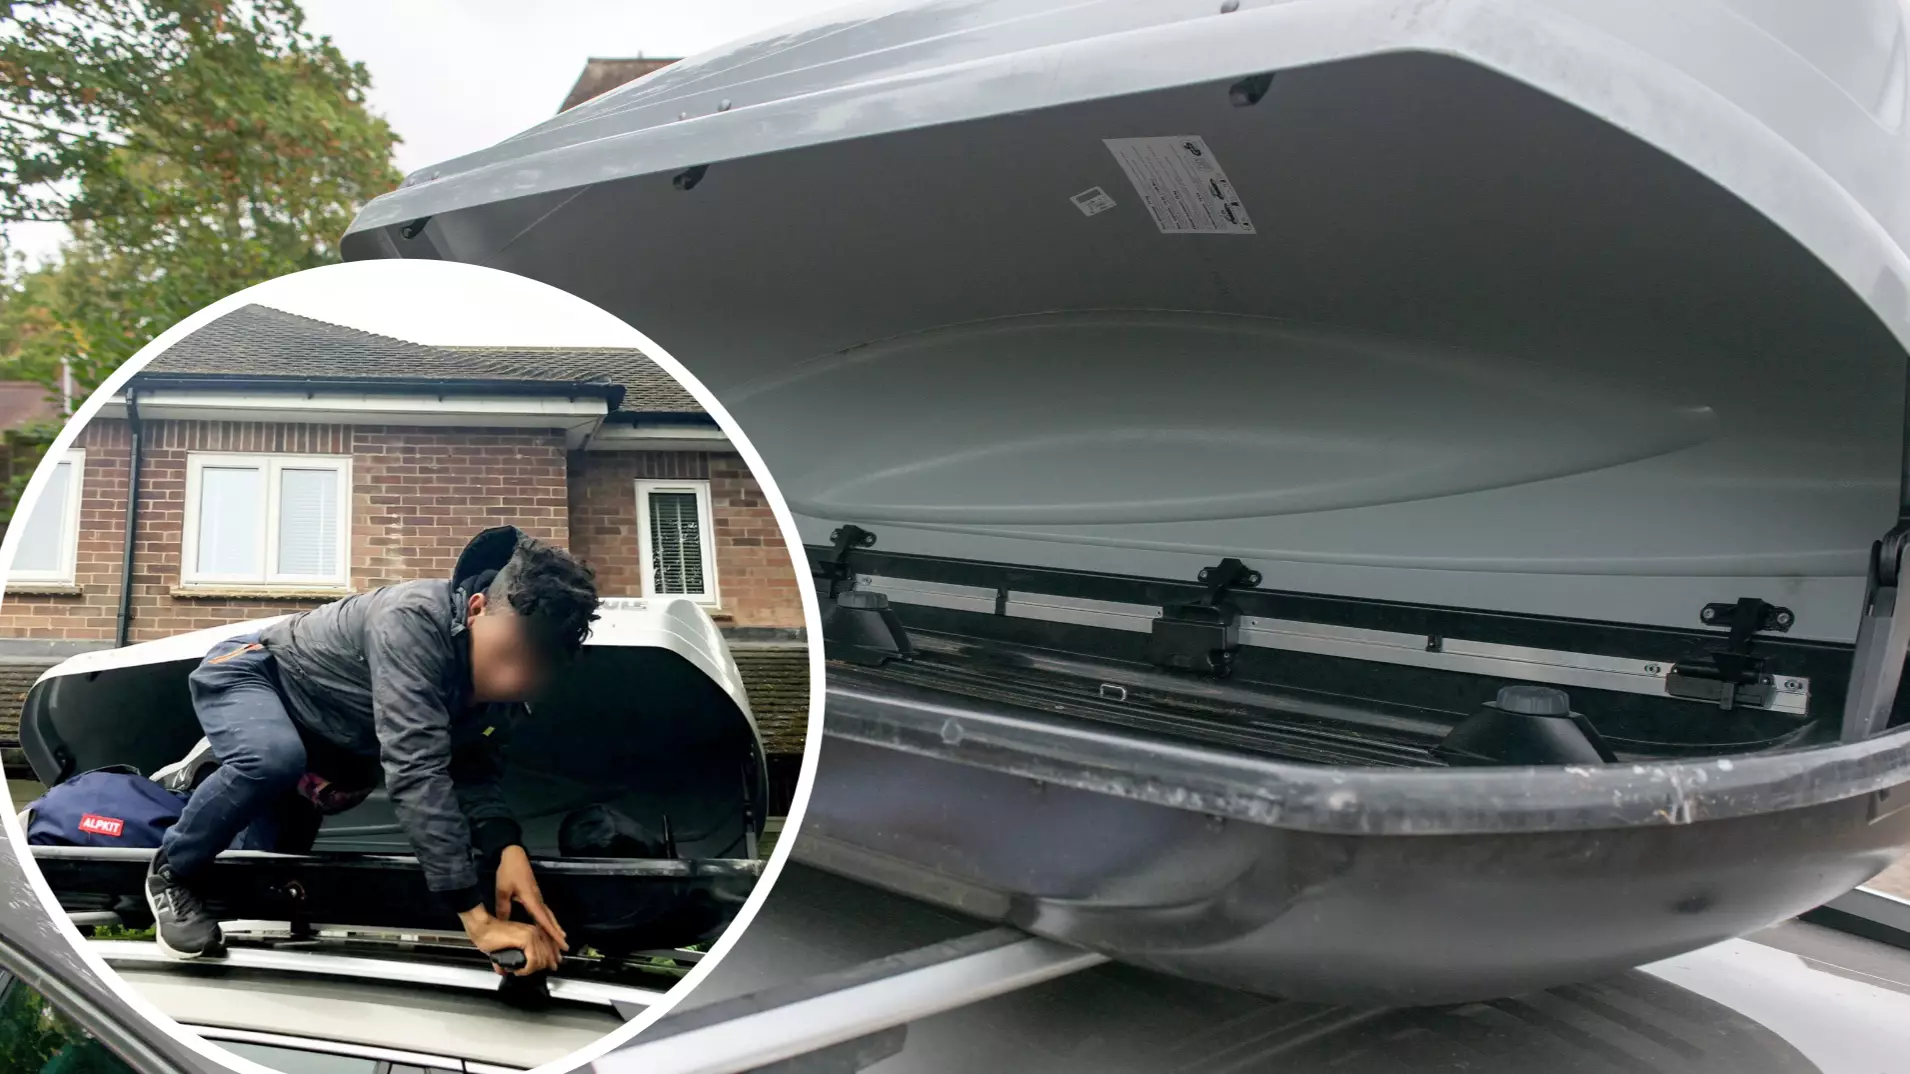 Couple Return From France To Find Egyptian Stowaway In Roof Box